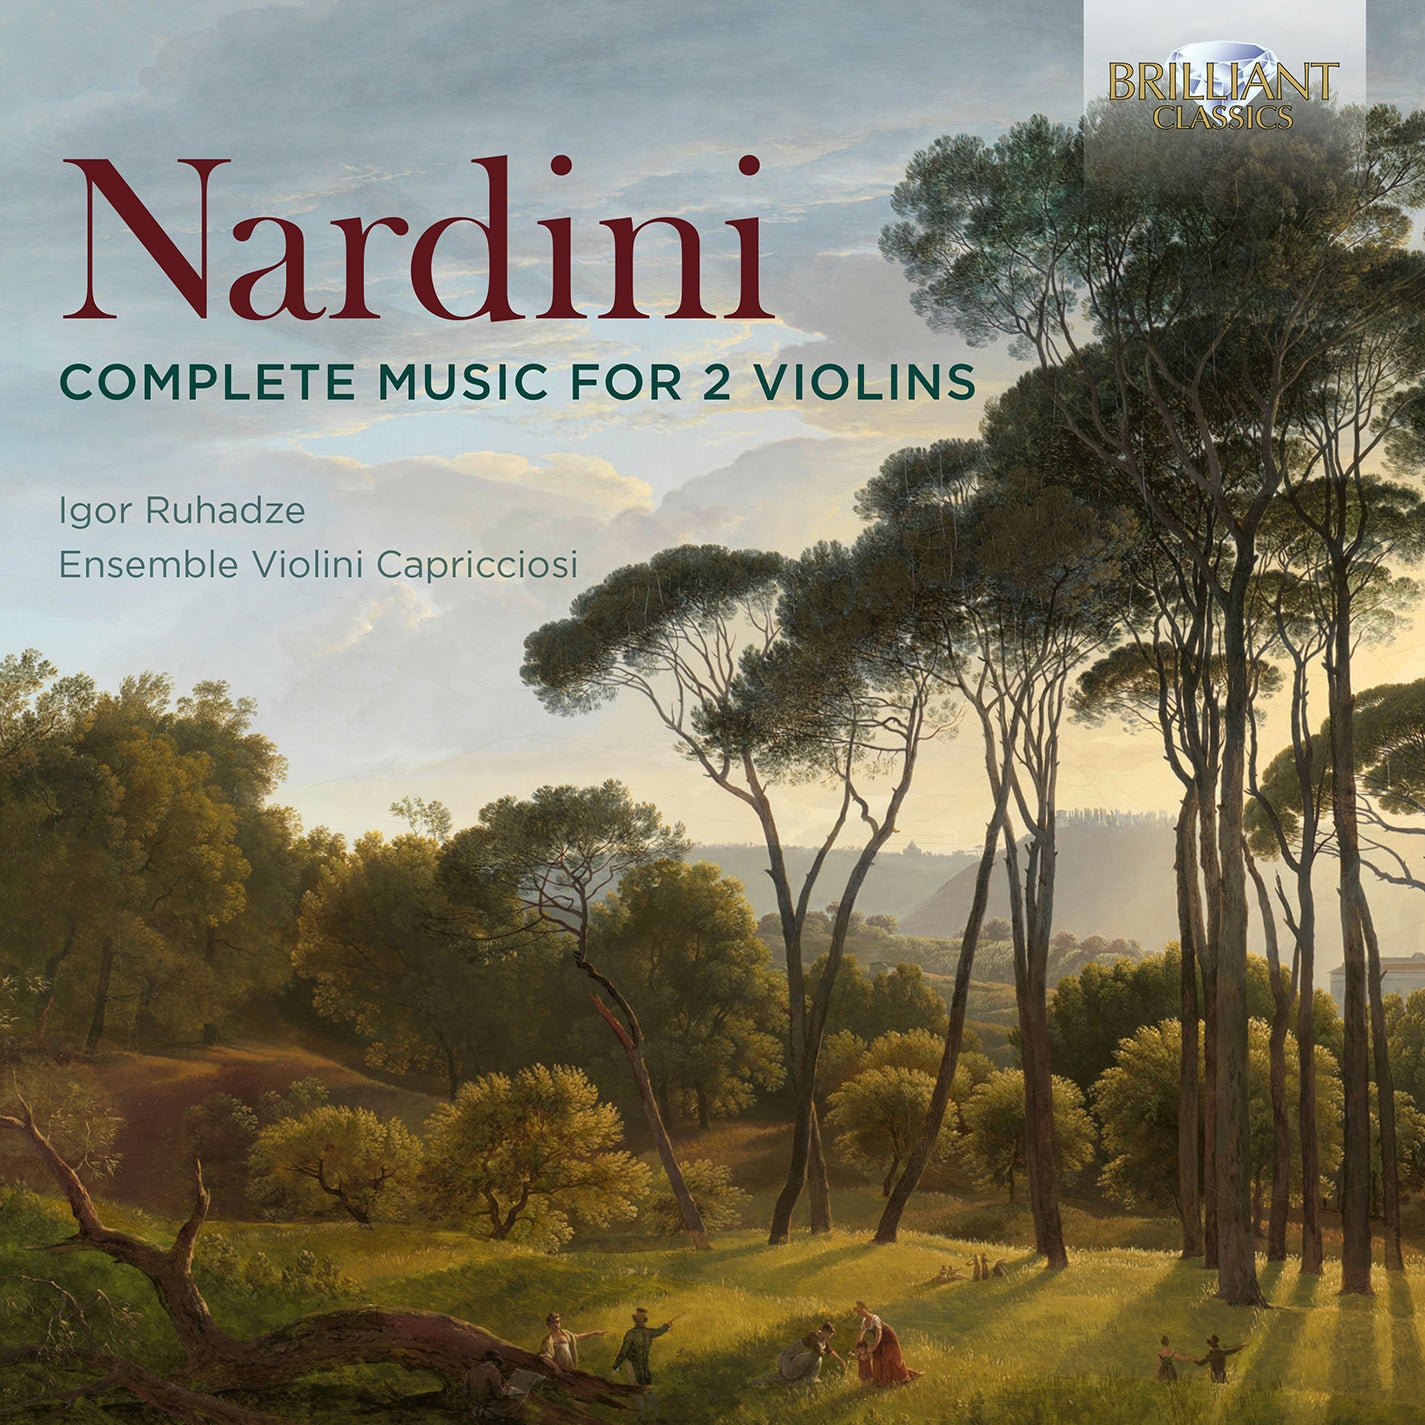 Nardini: Complete Music for 2 Violins [3 CDs]